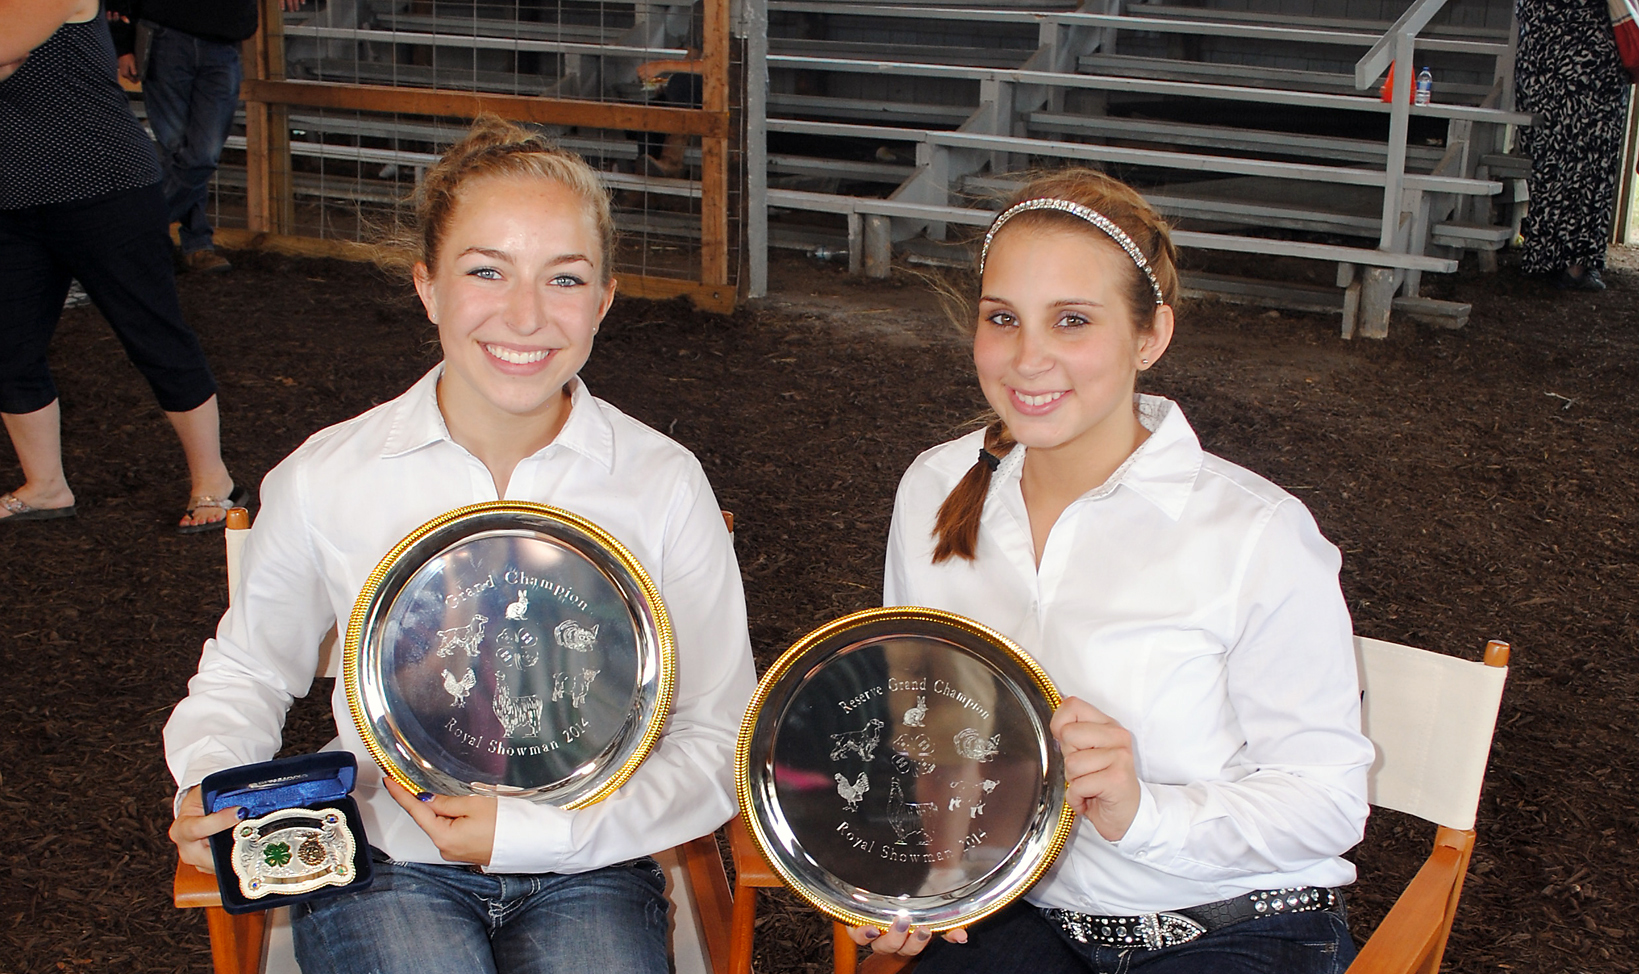 From left: Hannah Allaben of Fishers and Victoria Comin of Noblesville won champion and reserve champion respectively in the annual Royal Showmanship contest on July 21. (Photo by Robert Herrington)